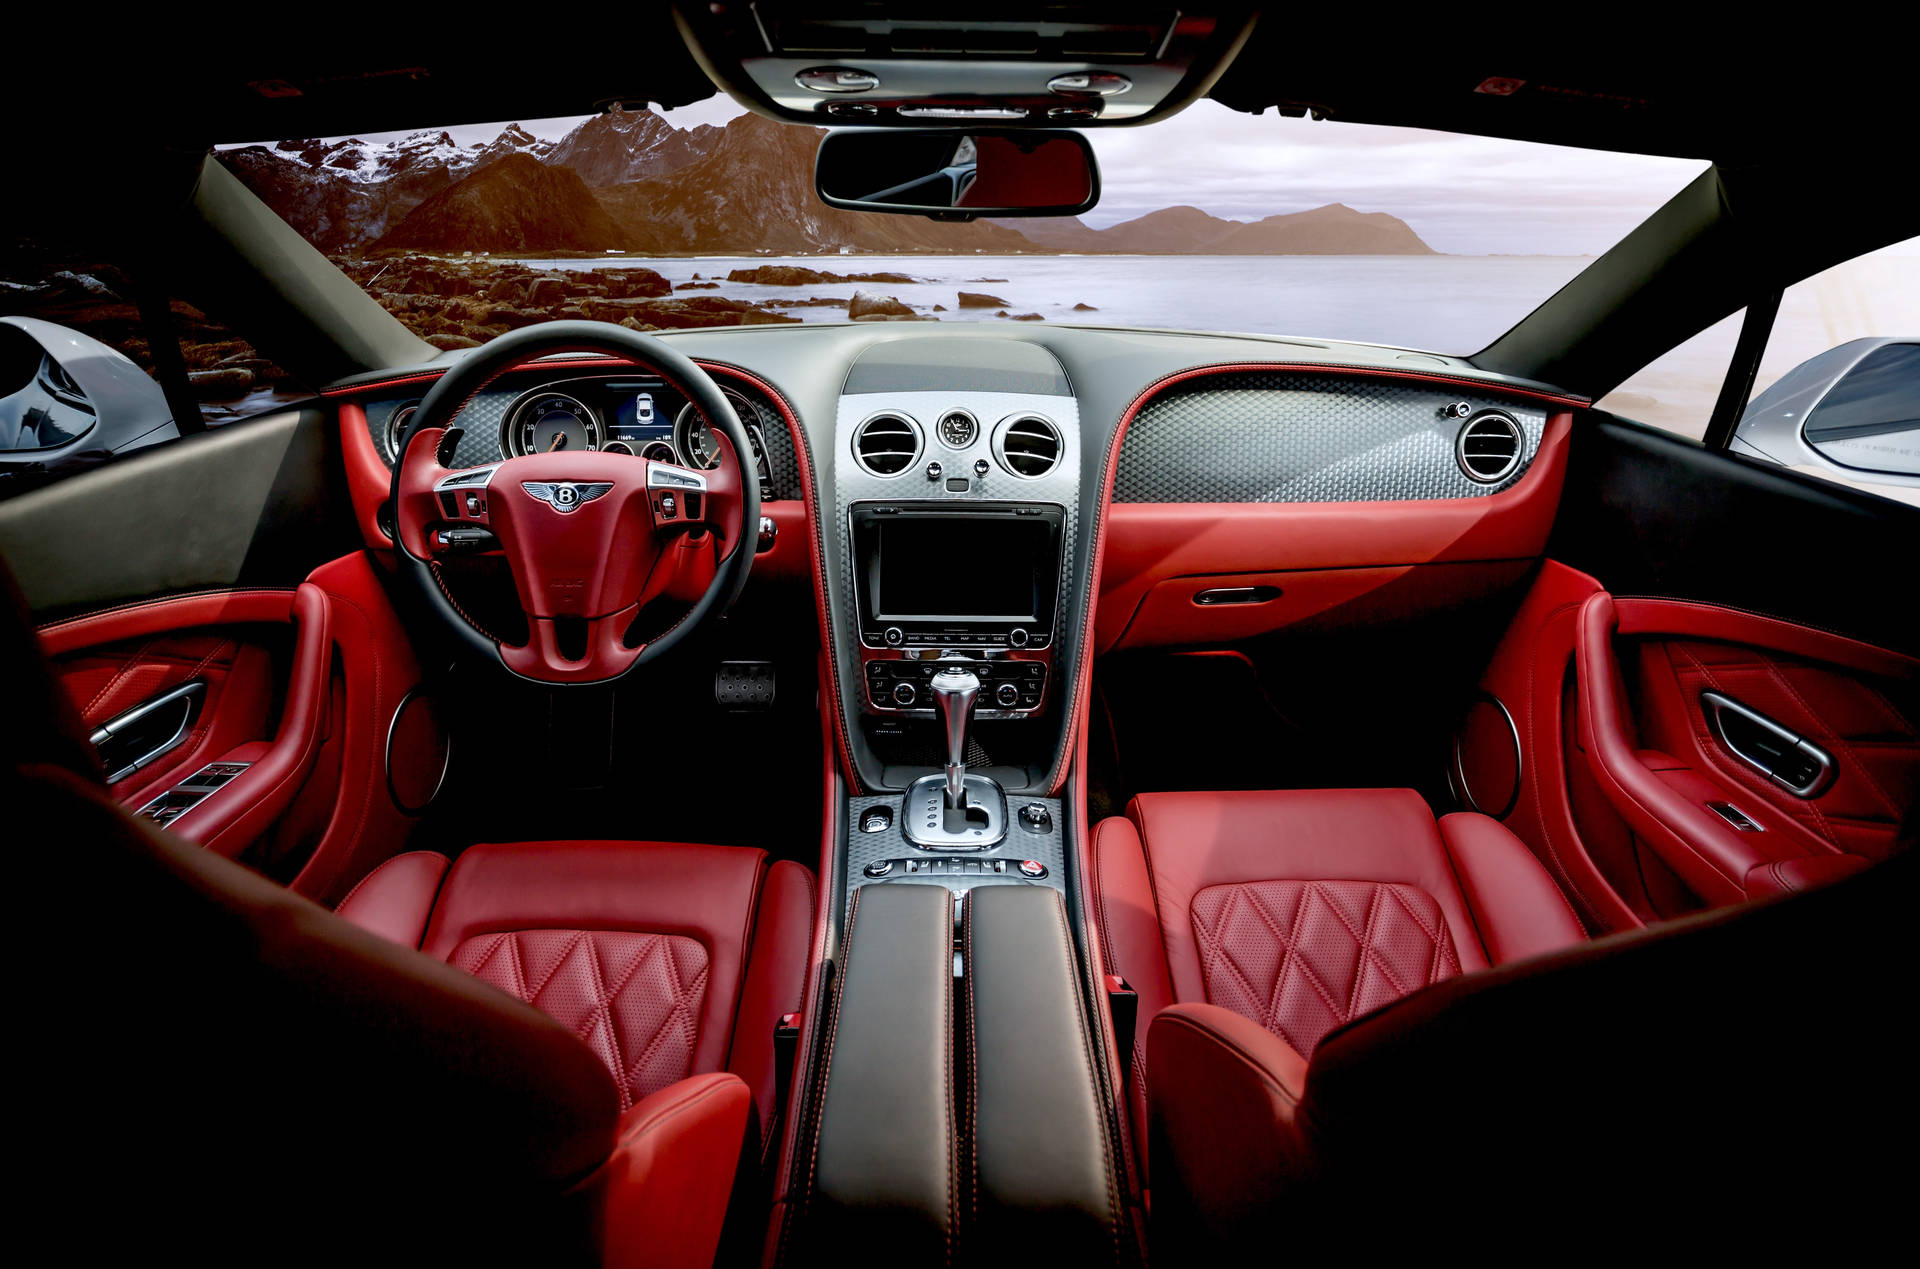 Aesthetic 4K Car With Red Interior Wallpaper